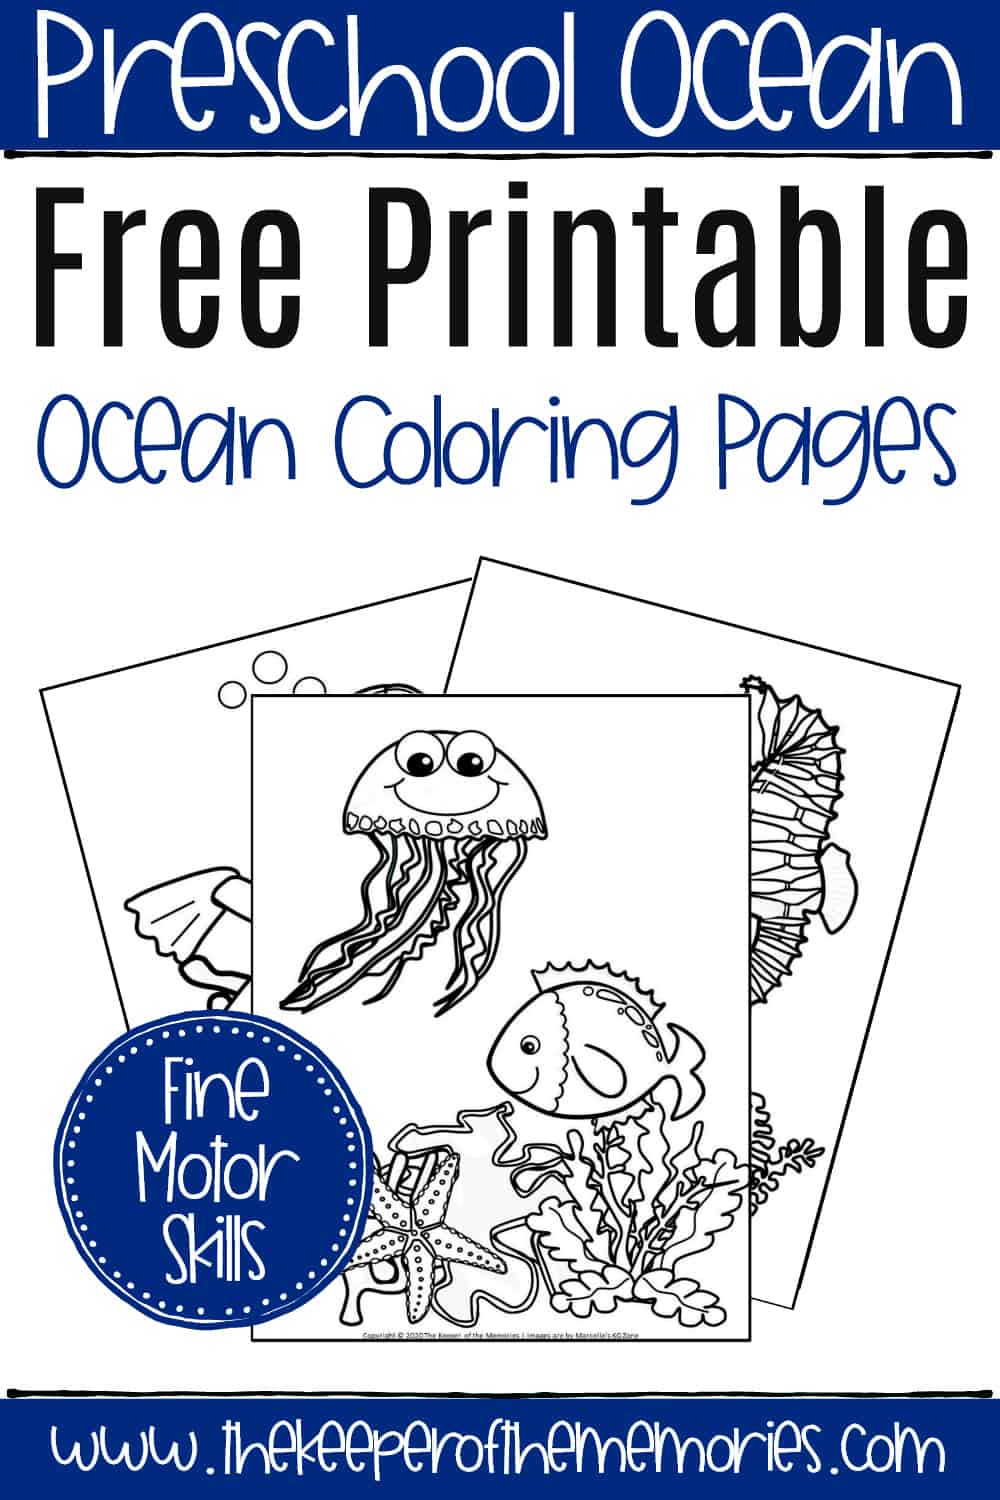 Free printable ocean coloring pages